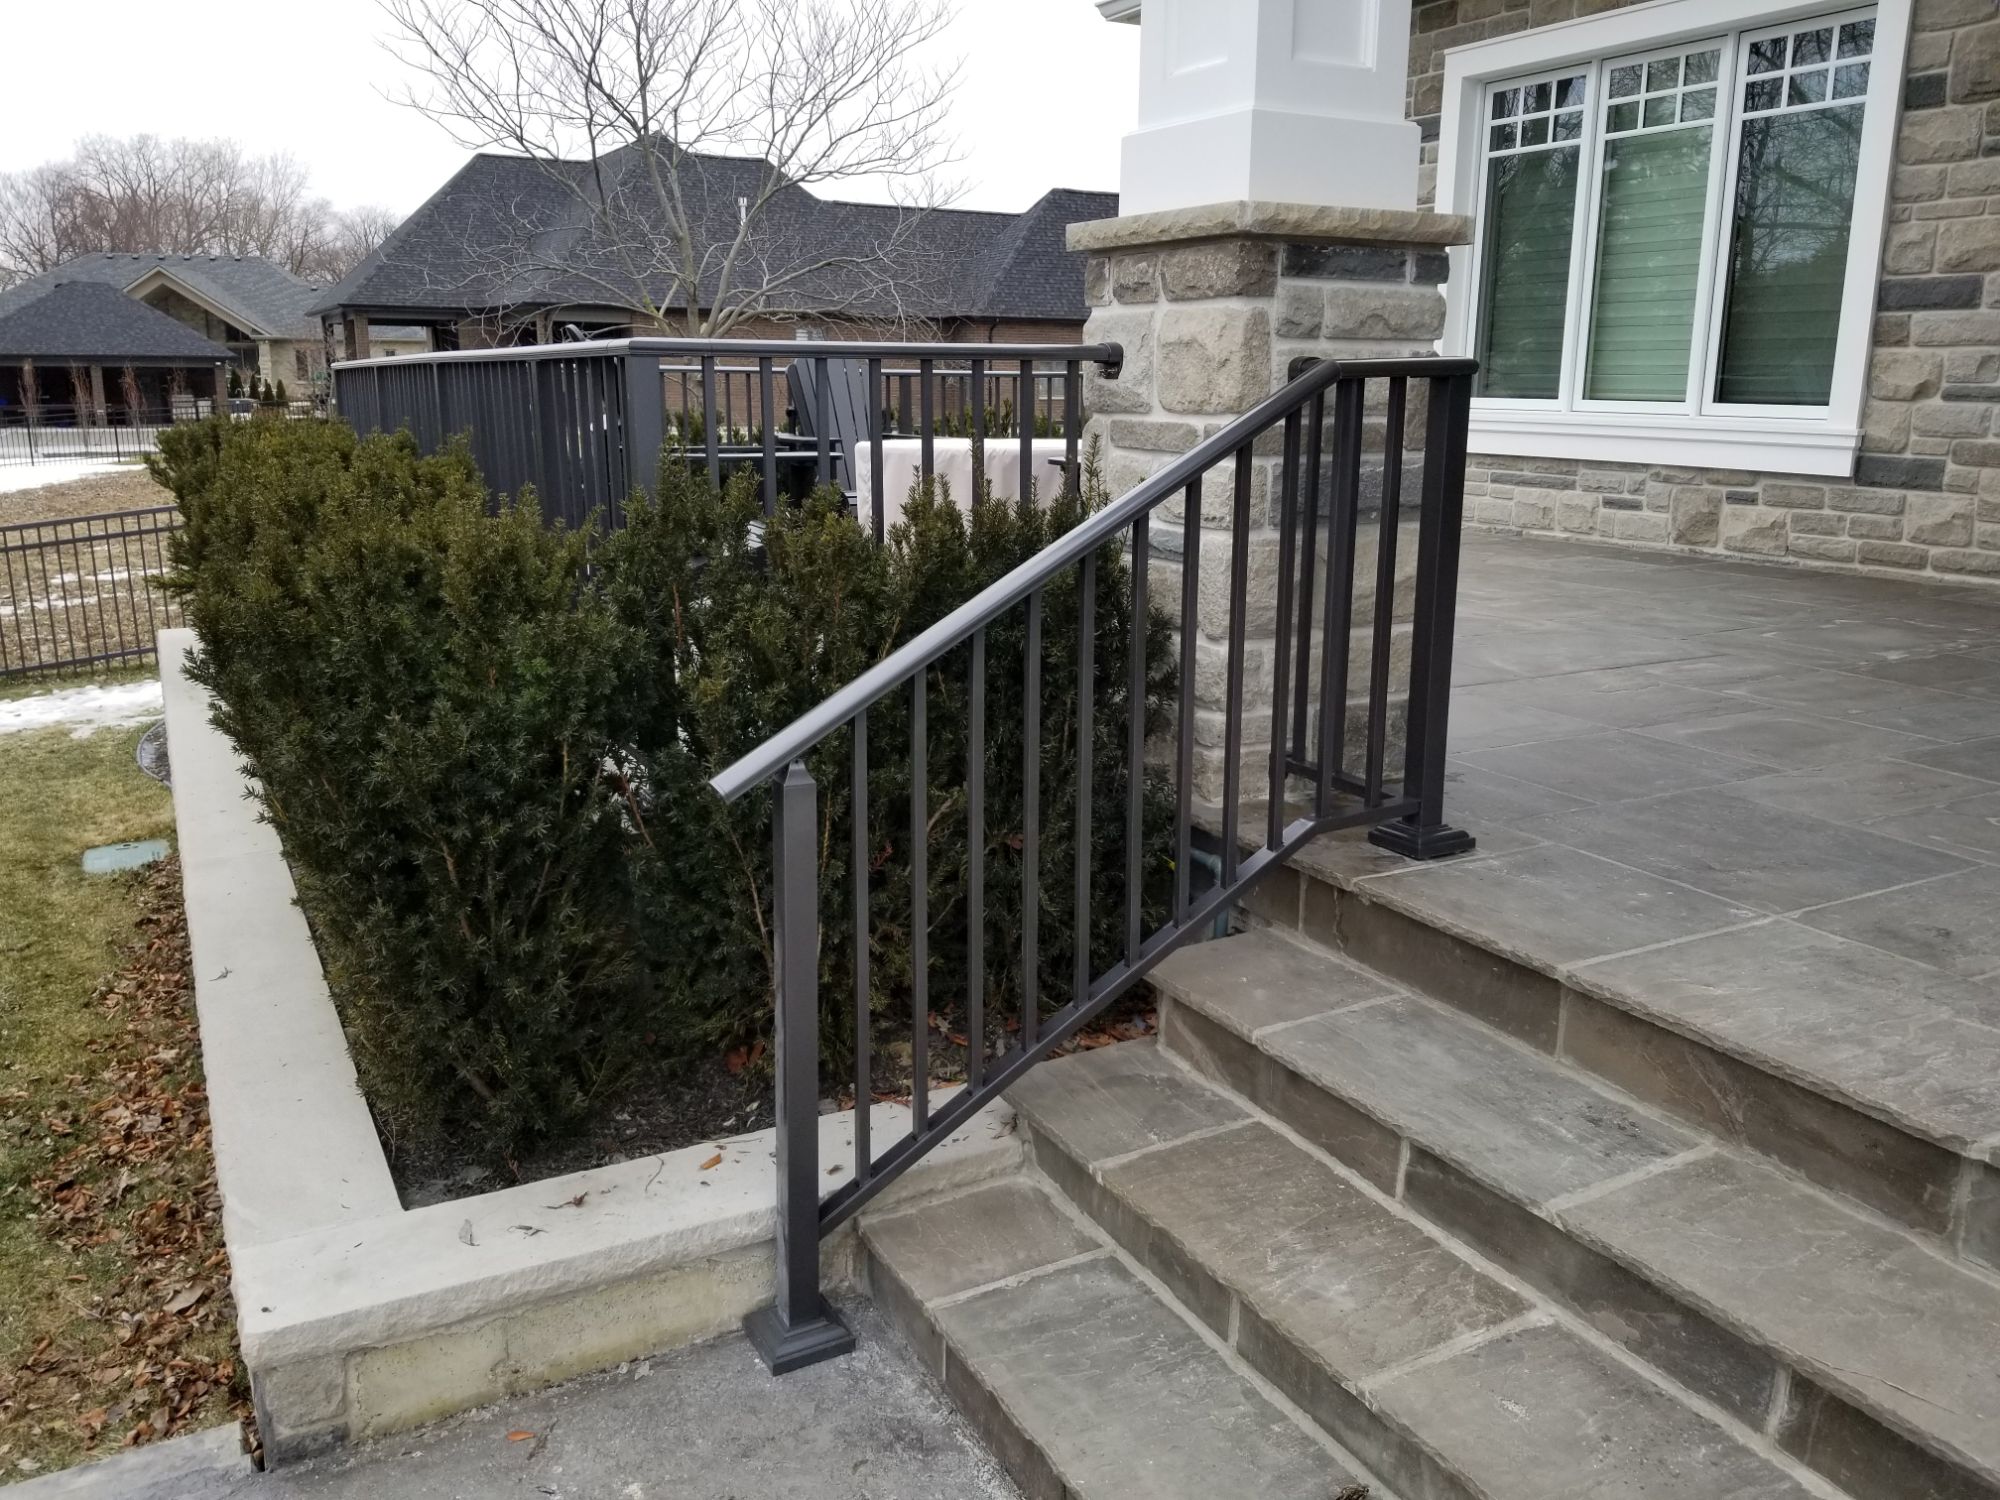 Another shot of the railing job we did on Houston in Kingsville. Customer built continuous stair railing that turns back to the stone column.